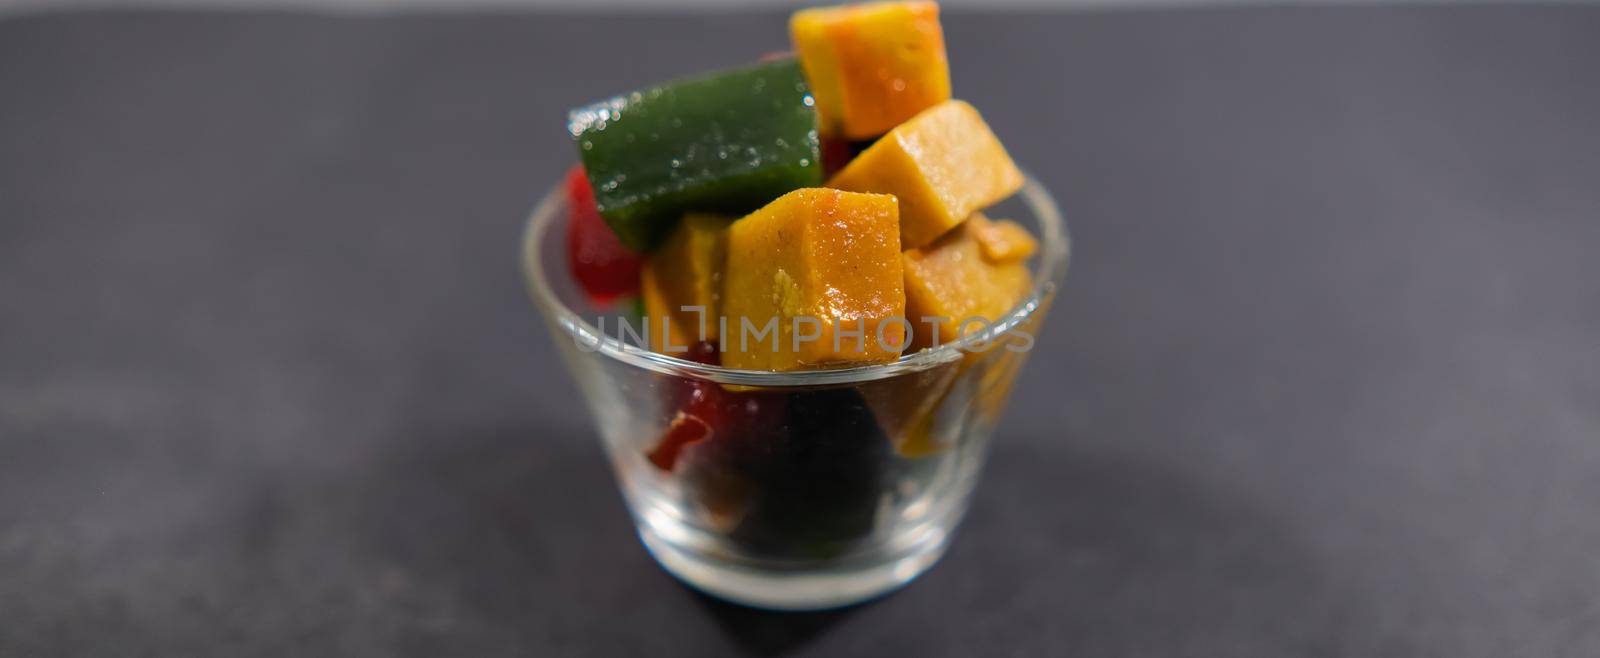 Glass of colorful Mexican fruit paste slices on black surface by Kanelbulle